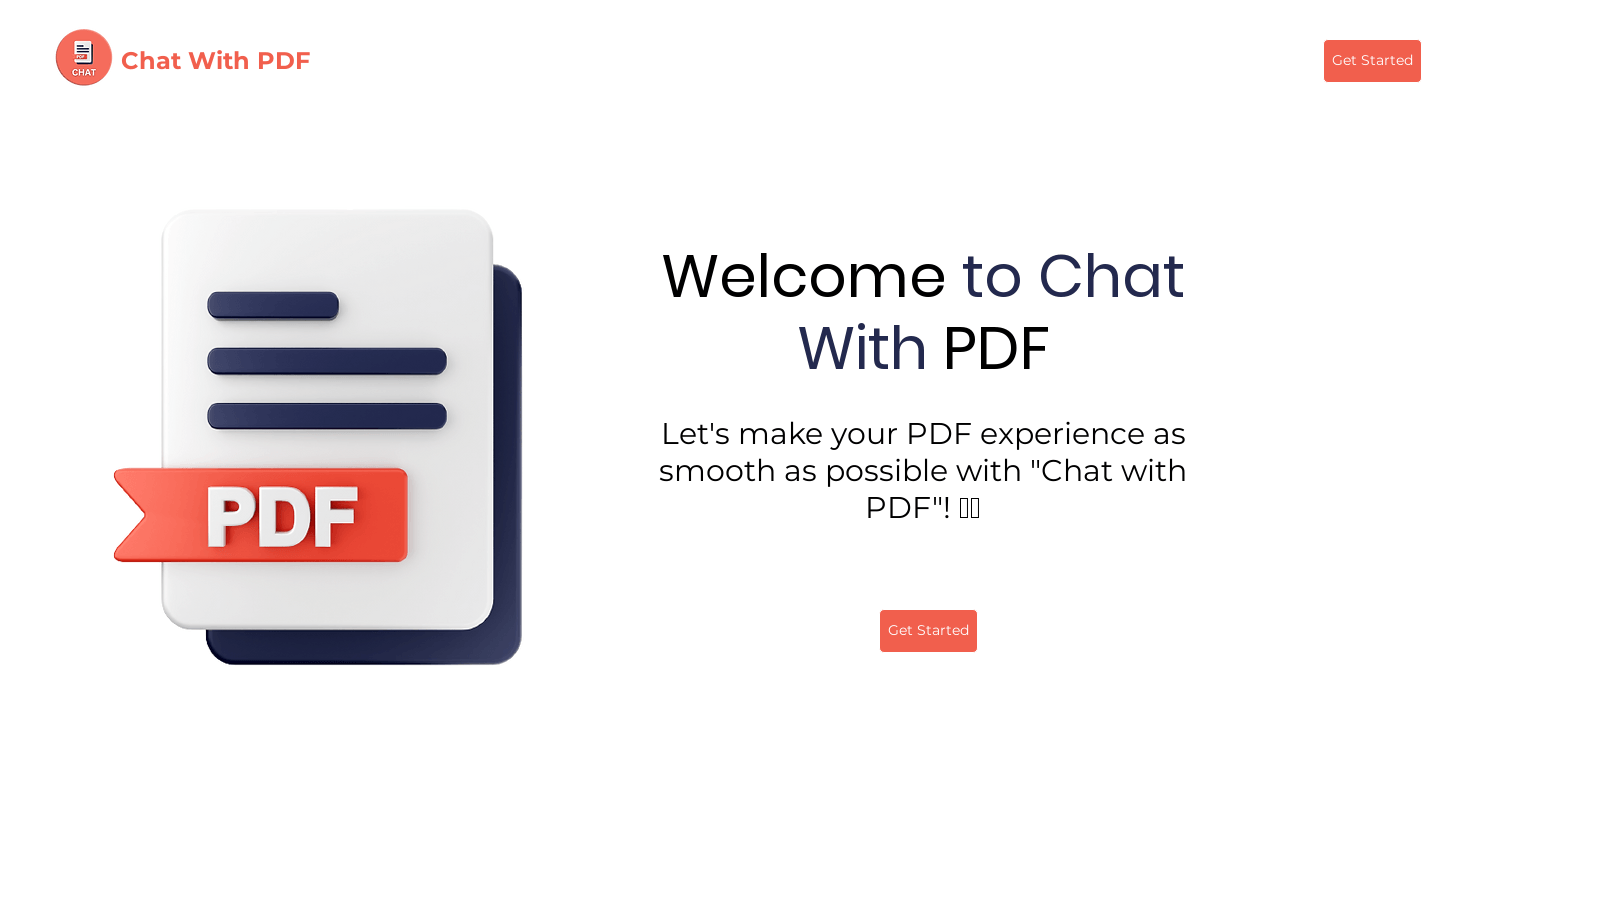 chatwithpdf.in